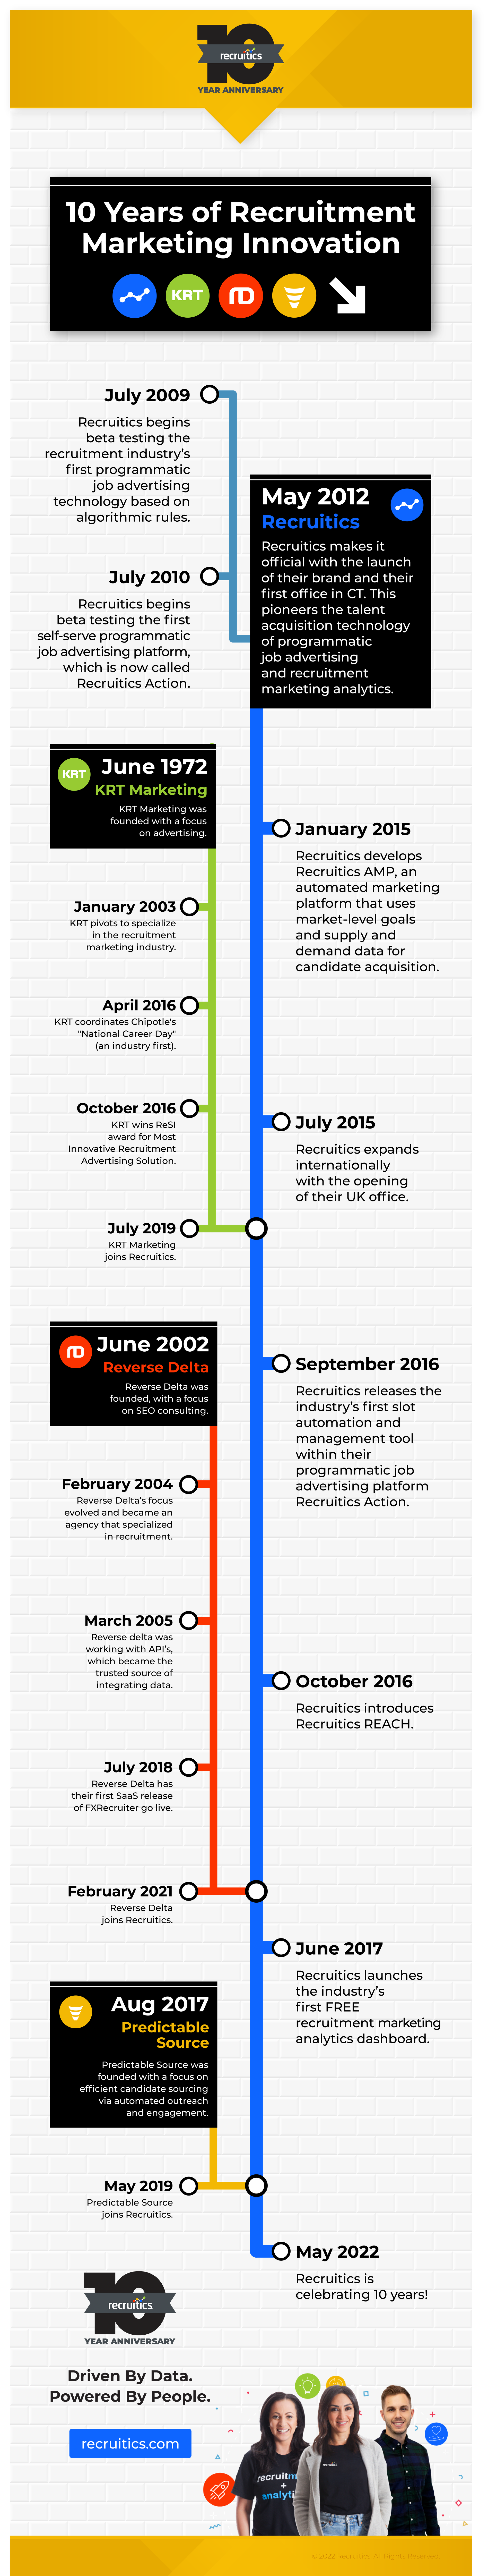 Infographic_10_Years_of_Recruitment_Marketing_Innovation_F